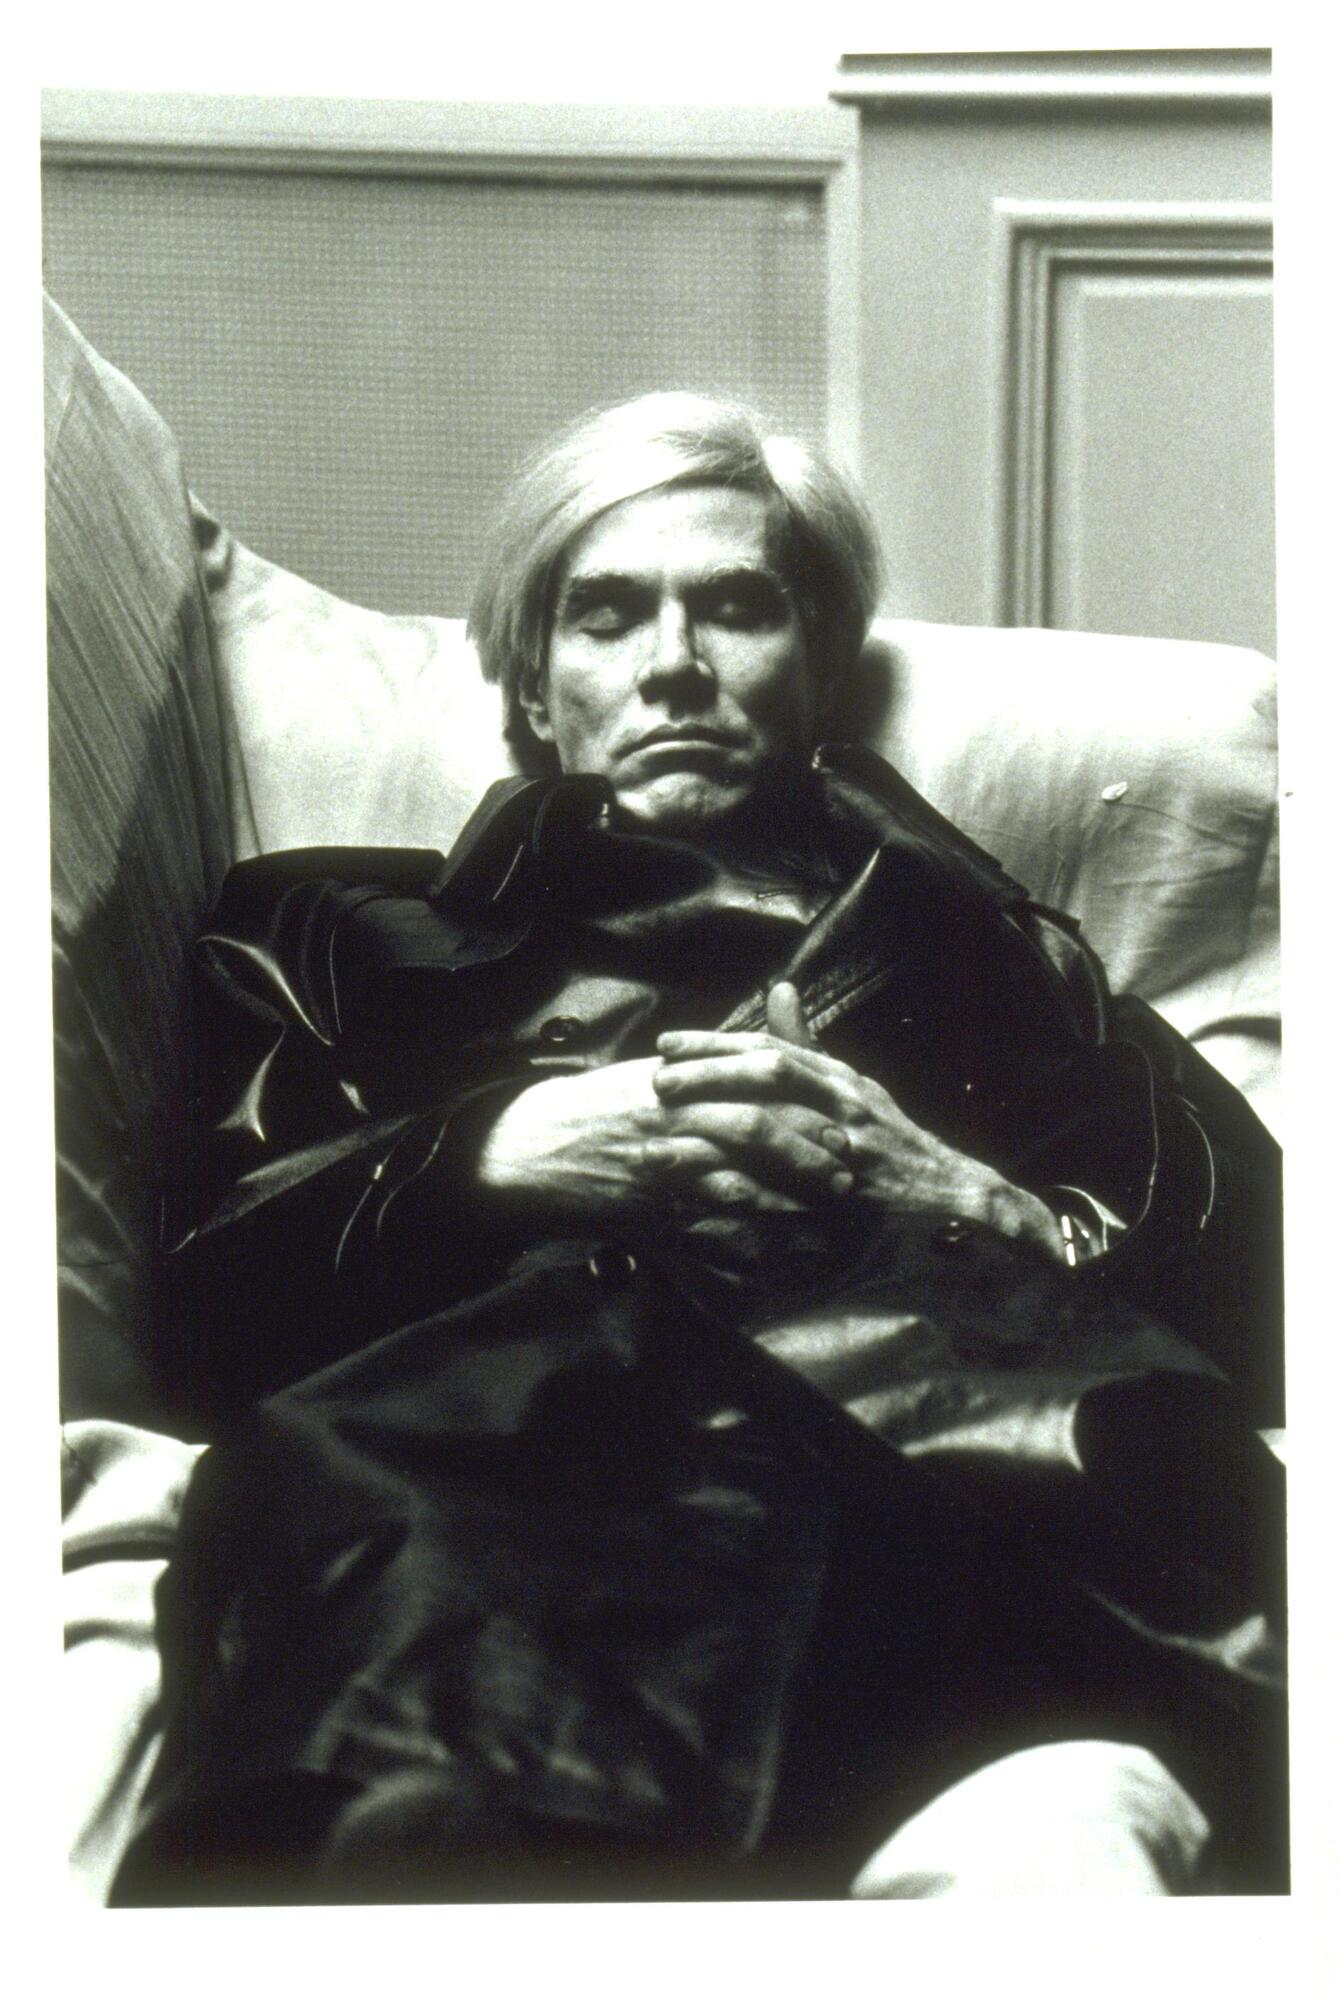 A photograph of a man reclined on a sofa. His eyes are closed and his hands are clasped and resting on his chest.